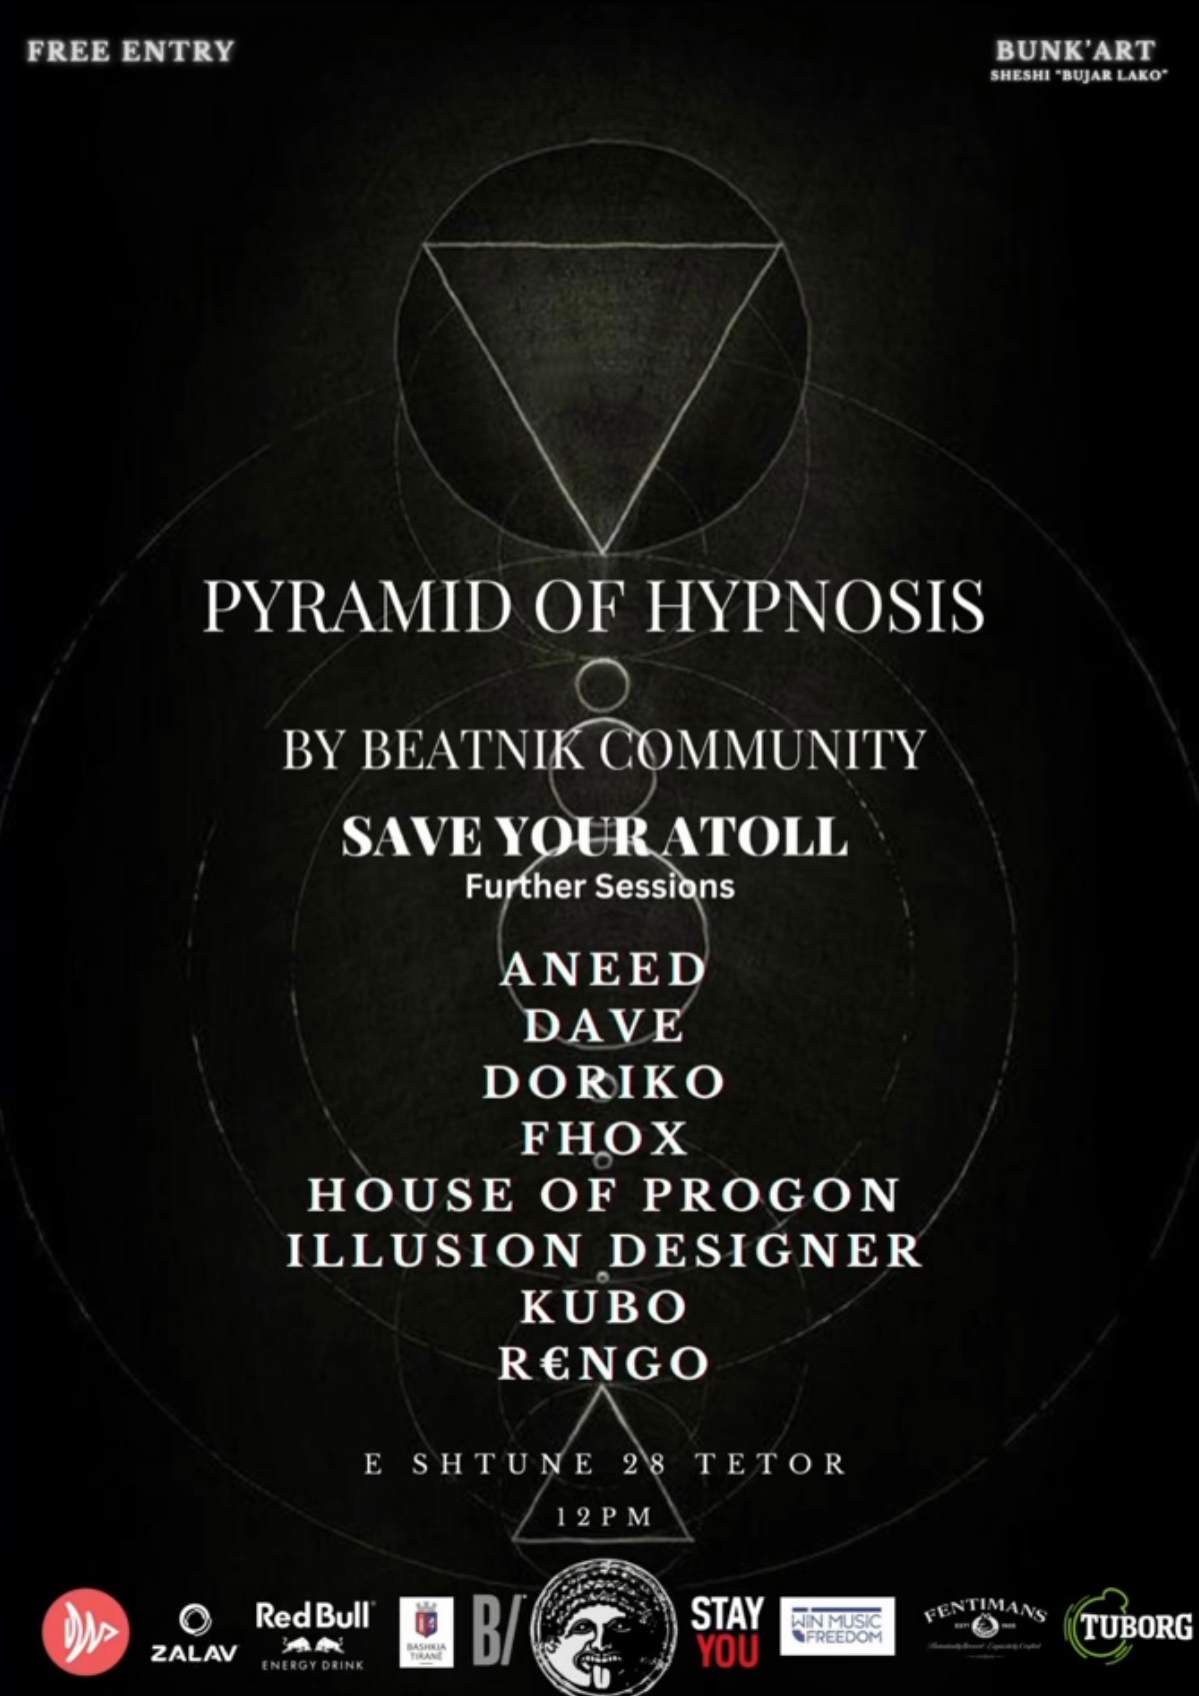 Pyramid of Hypnosis w/Save Your Atoll - フライヤー表